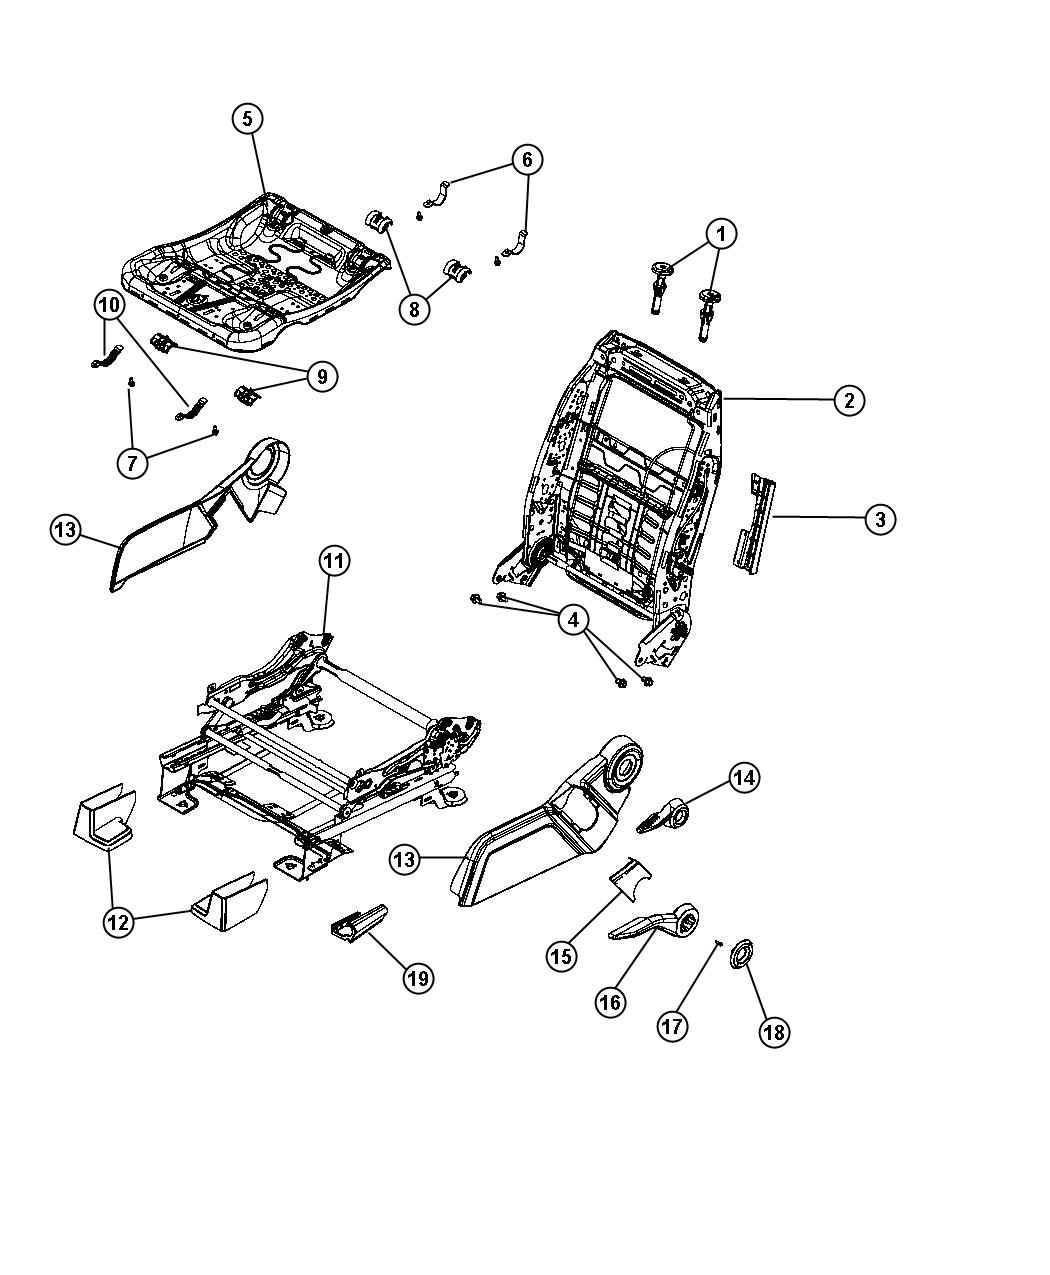 Adjusters, Recliners and Shields - Driver Seat - Manual. Diagram